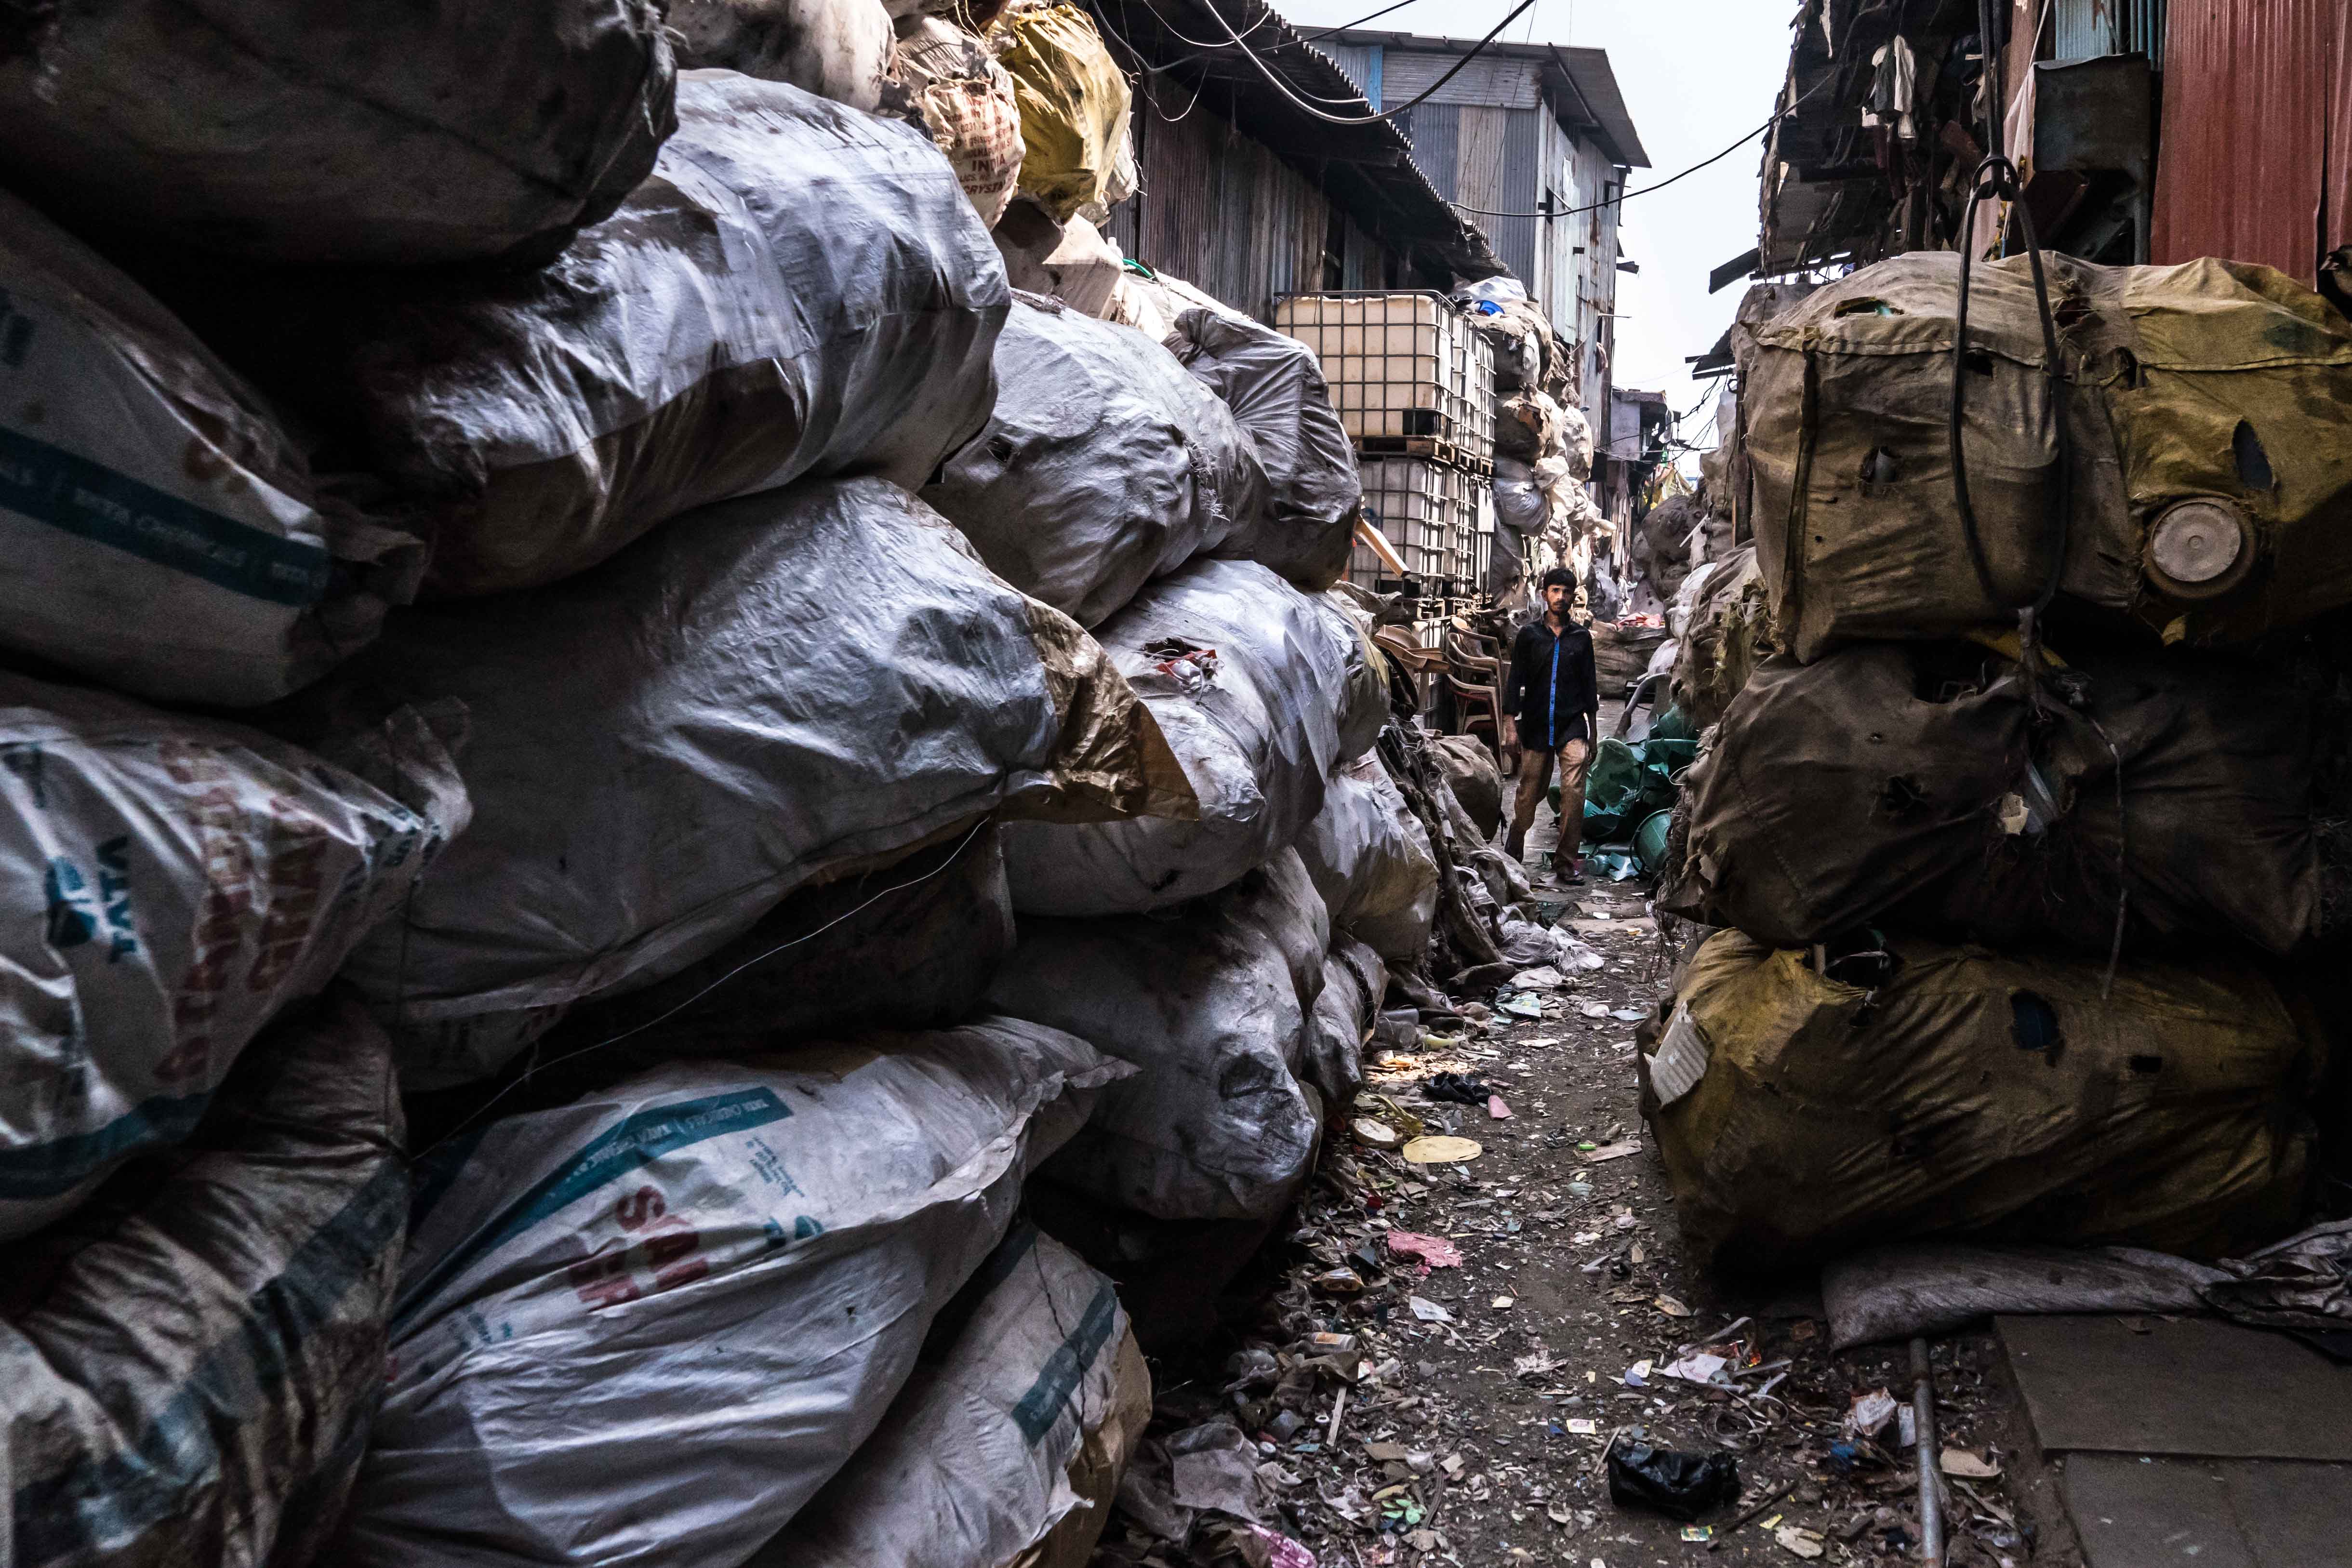 In the hearth of Mumbai, Dharavi is the most productive slum in the world, with the annual turnover of business valued at $1billlion USD per year, mainly based on the recycle industry.